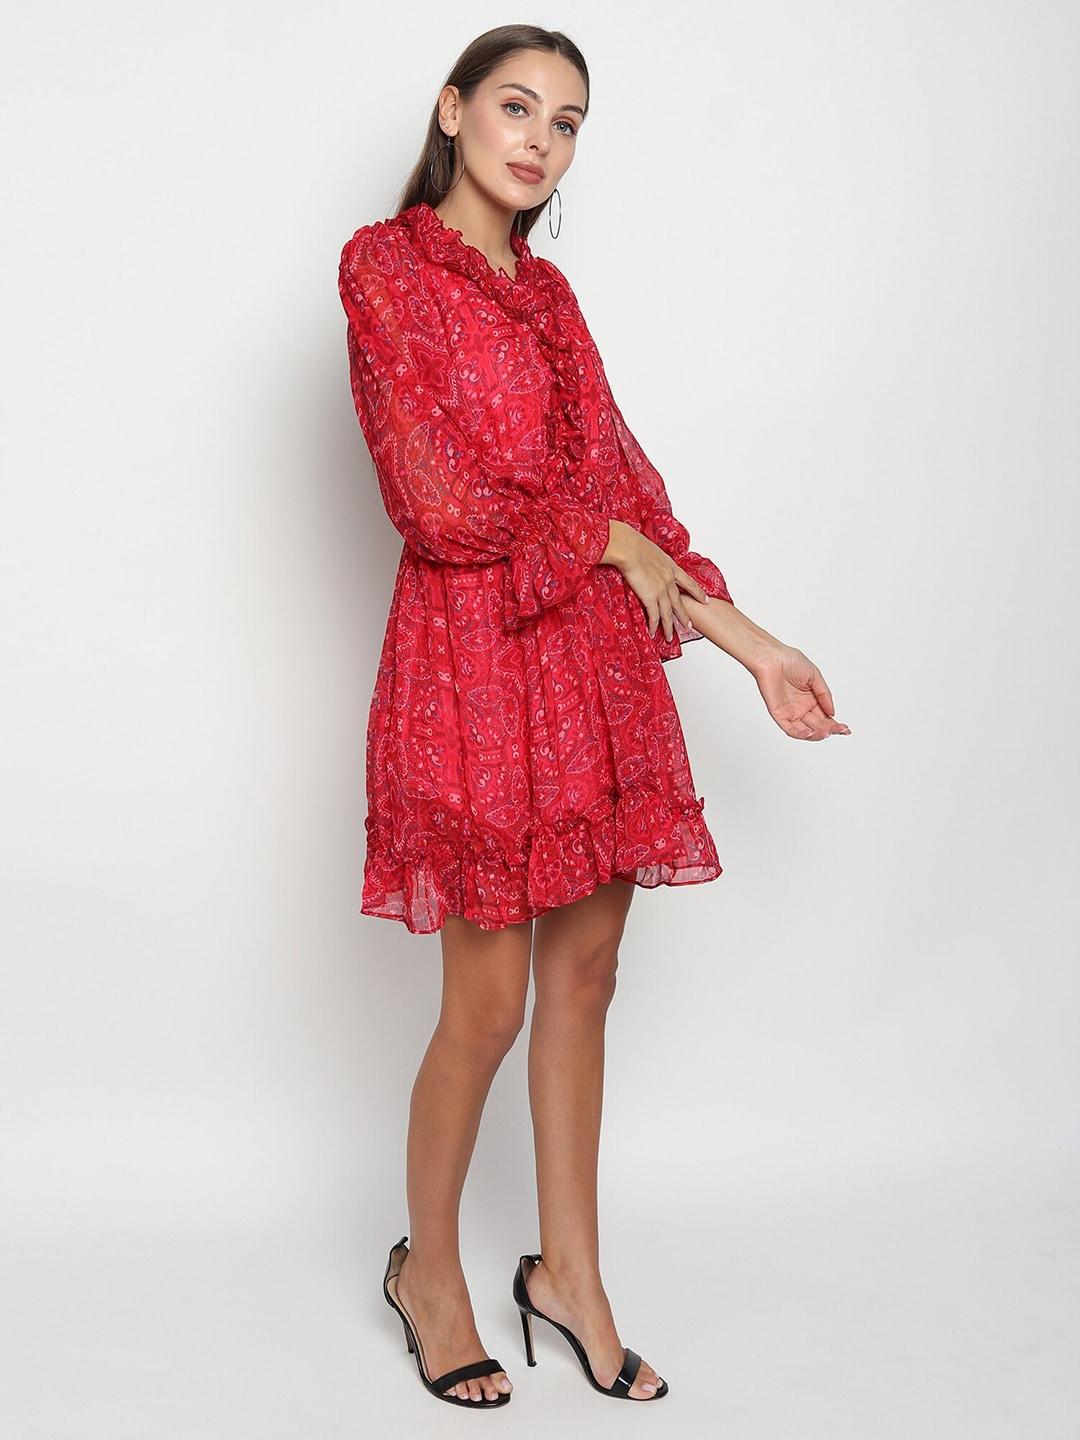 ISAM Red Floral Printed Chiffon Dress